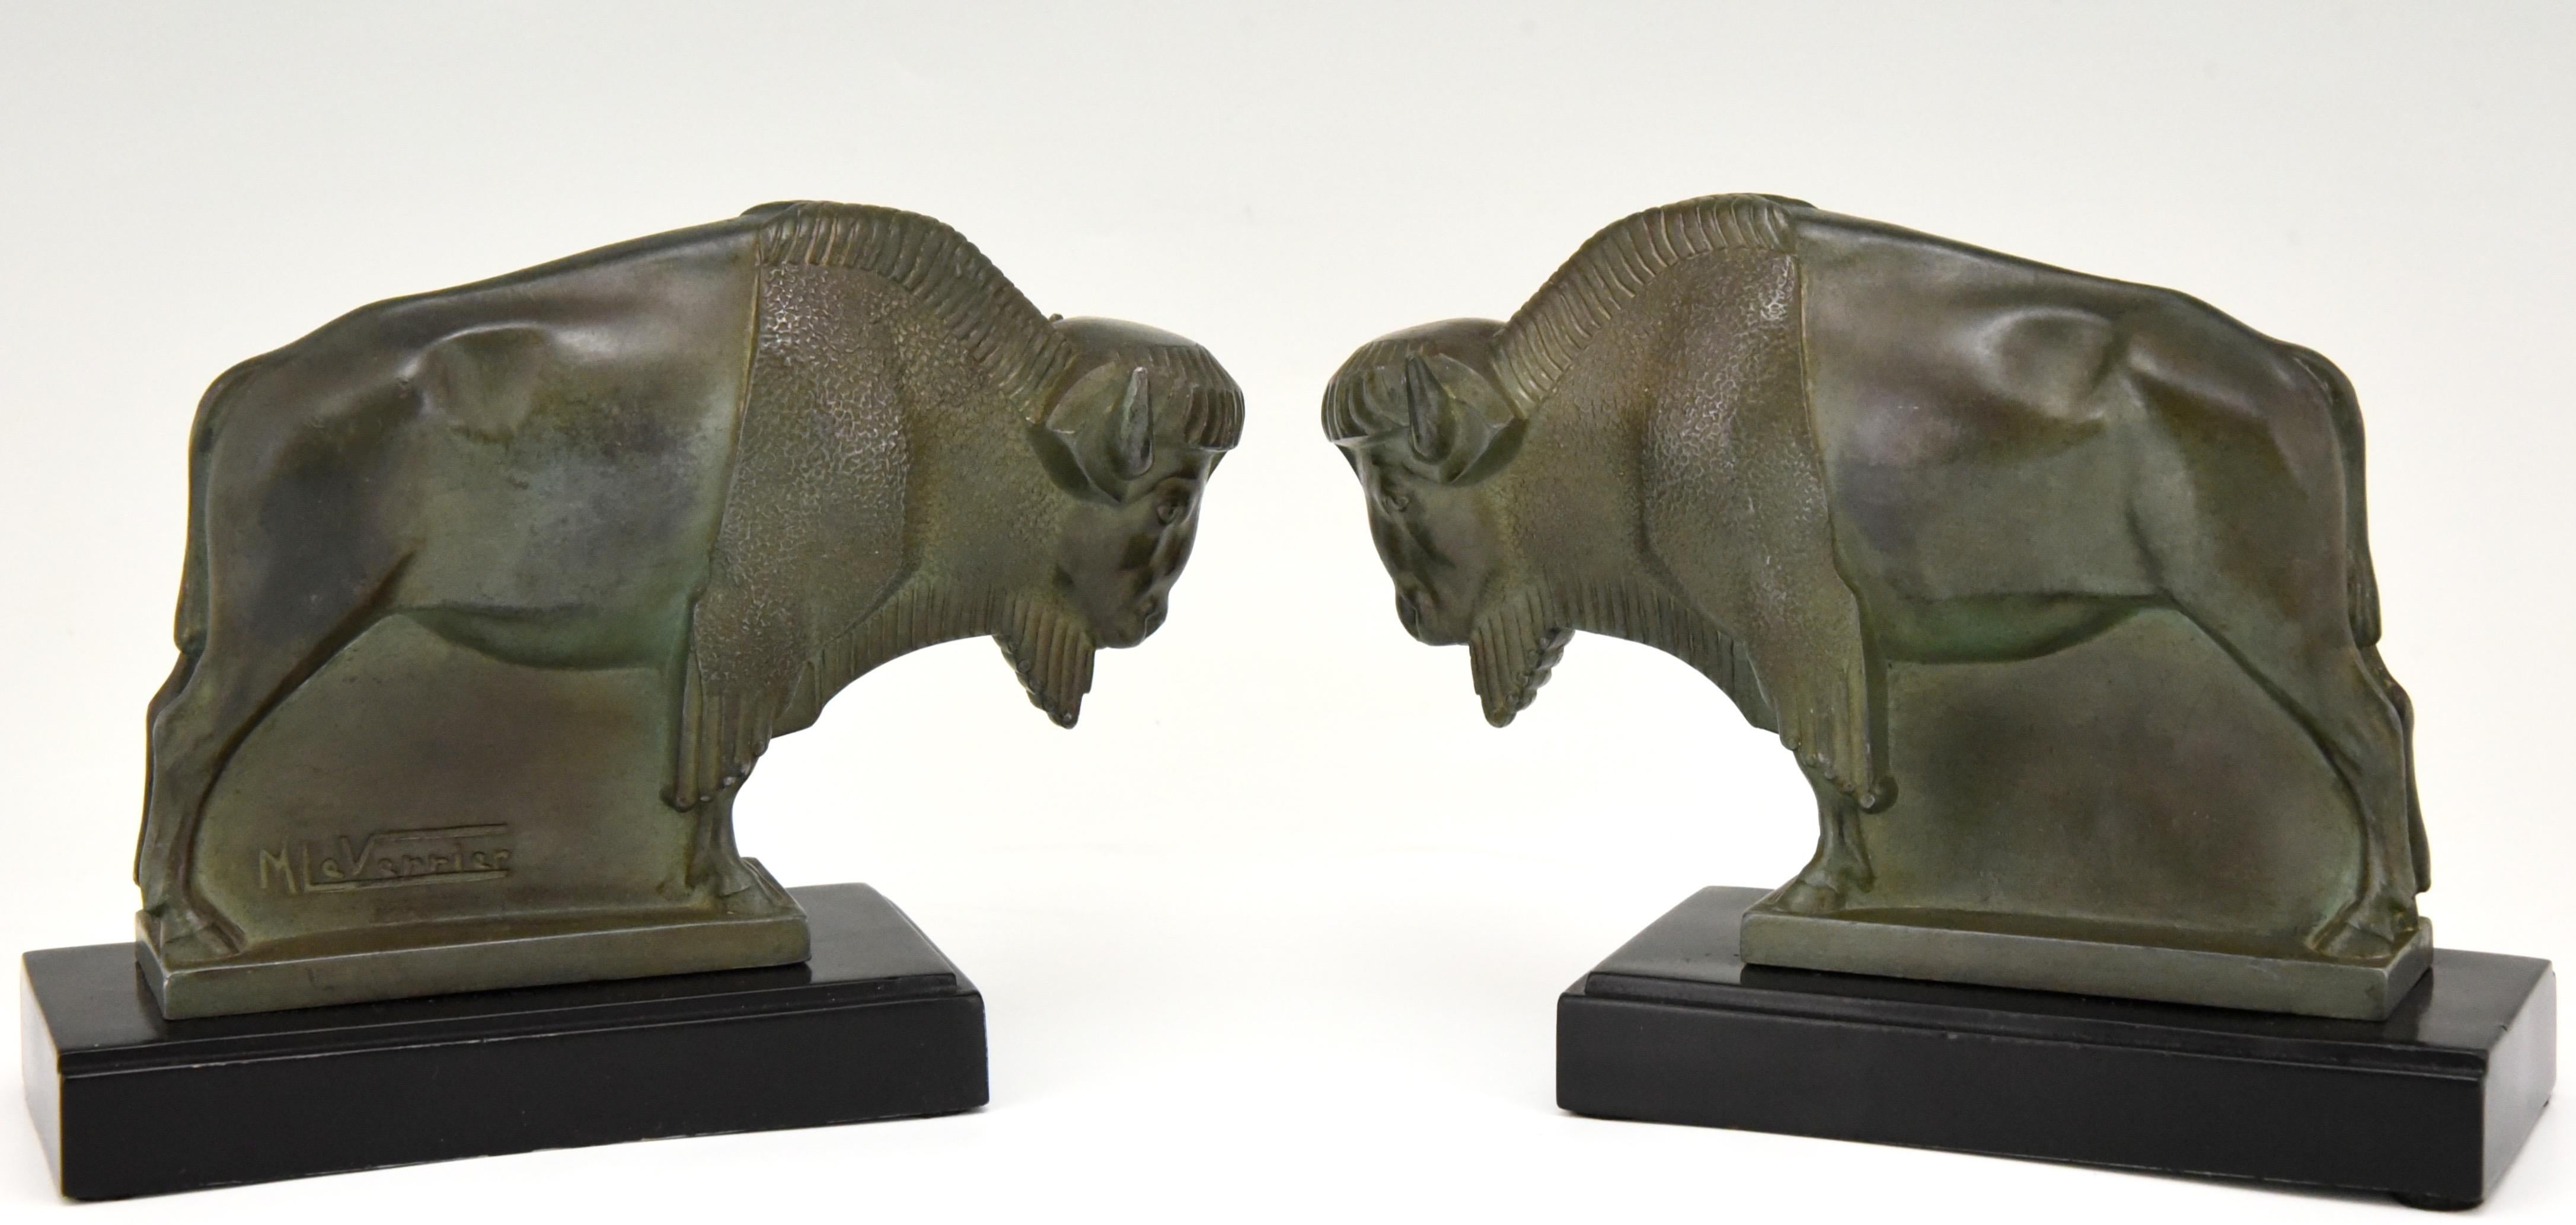 A very fine pair of Art Deco bison bookends by the famous French artist Max Le Verrier with lovely green patina. France 1930.
Literature:
“Art deco sculpture” by Victor Arwas, Academy. “Bronzes, sculptors and founders” by H. Berman, Abage.